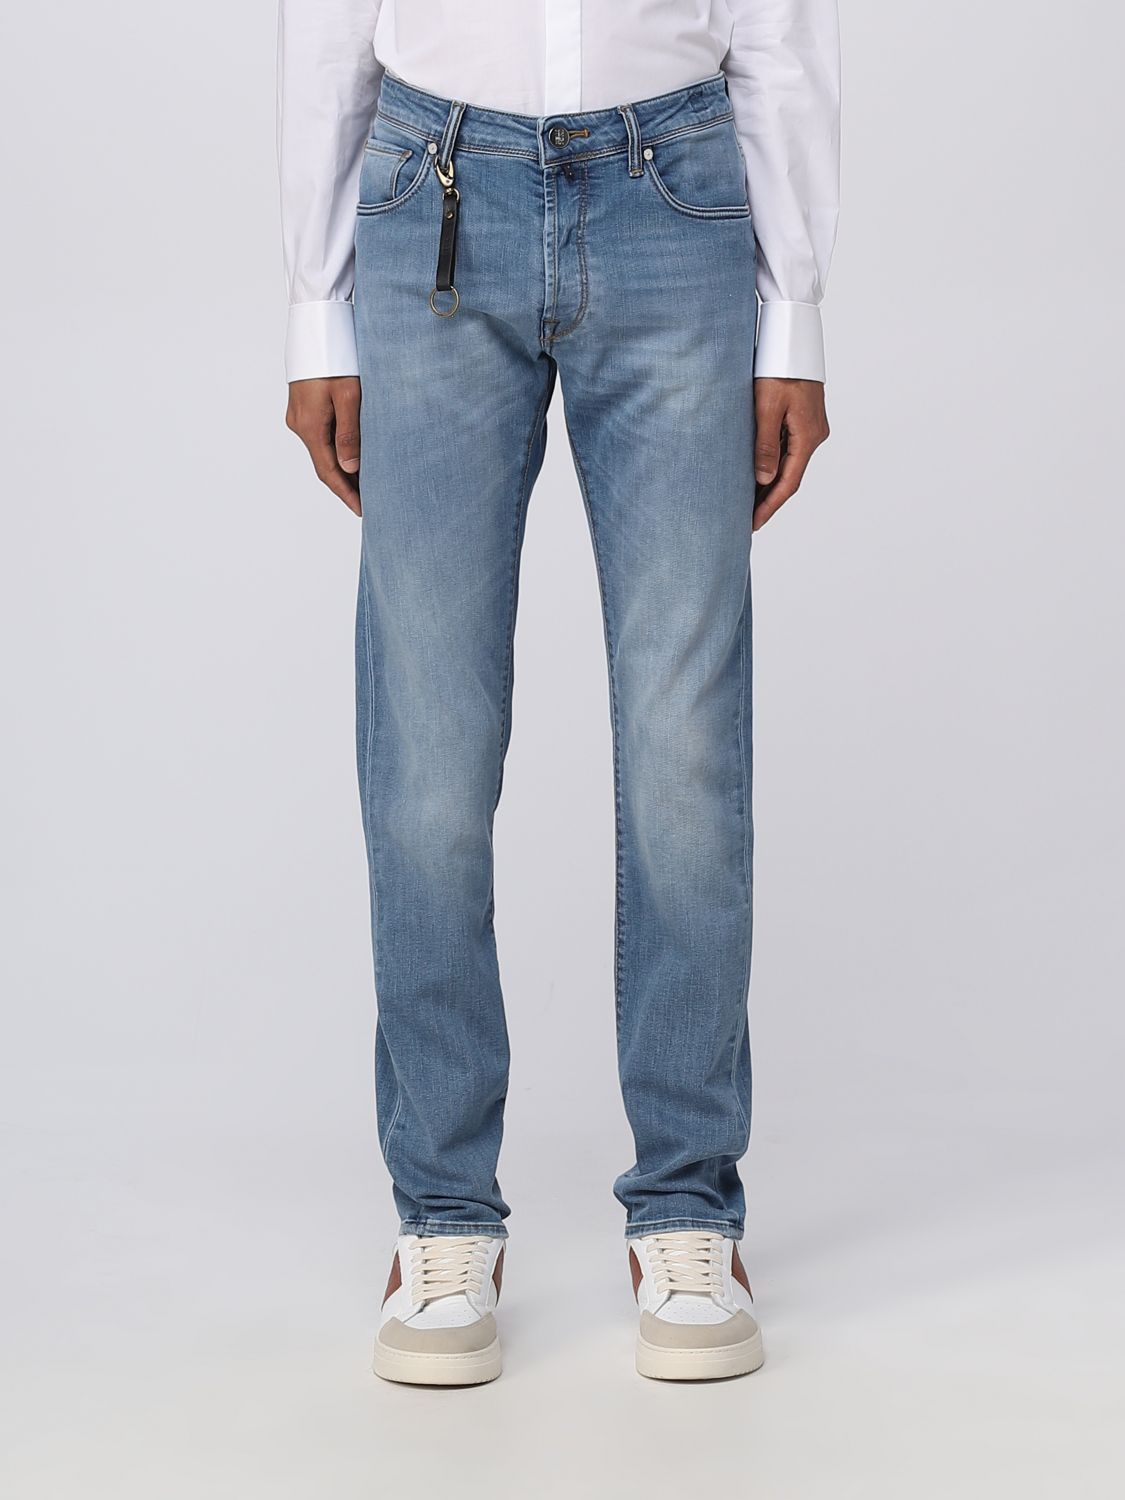 Incotex Jeans  Men Color Stone Washed